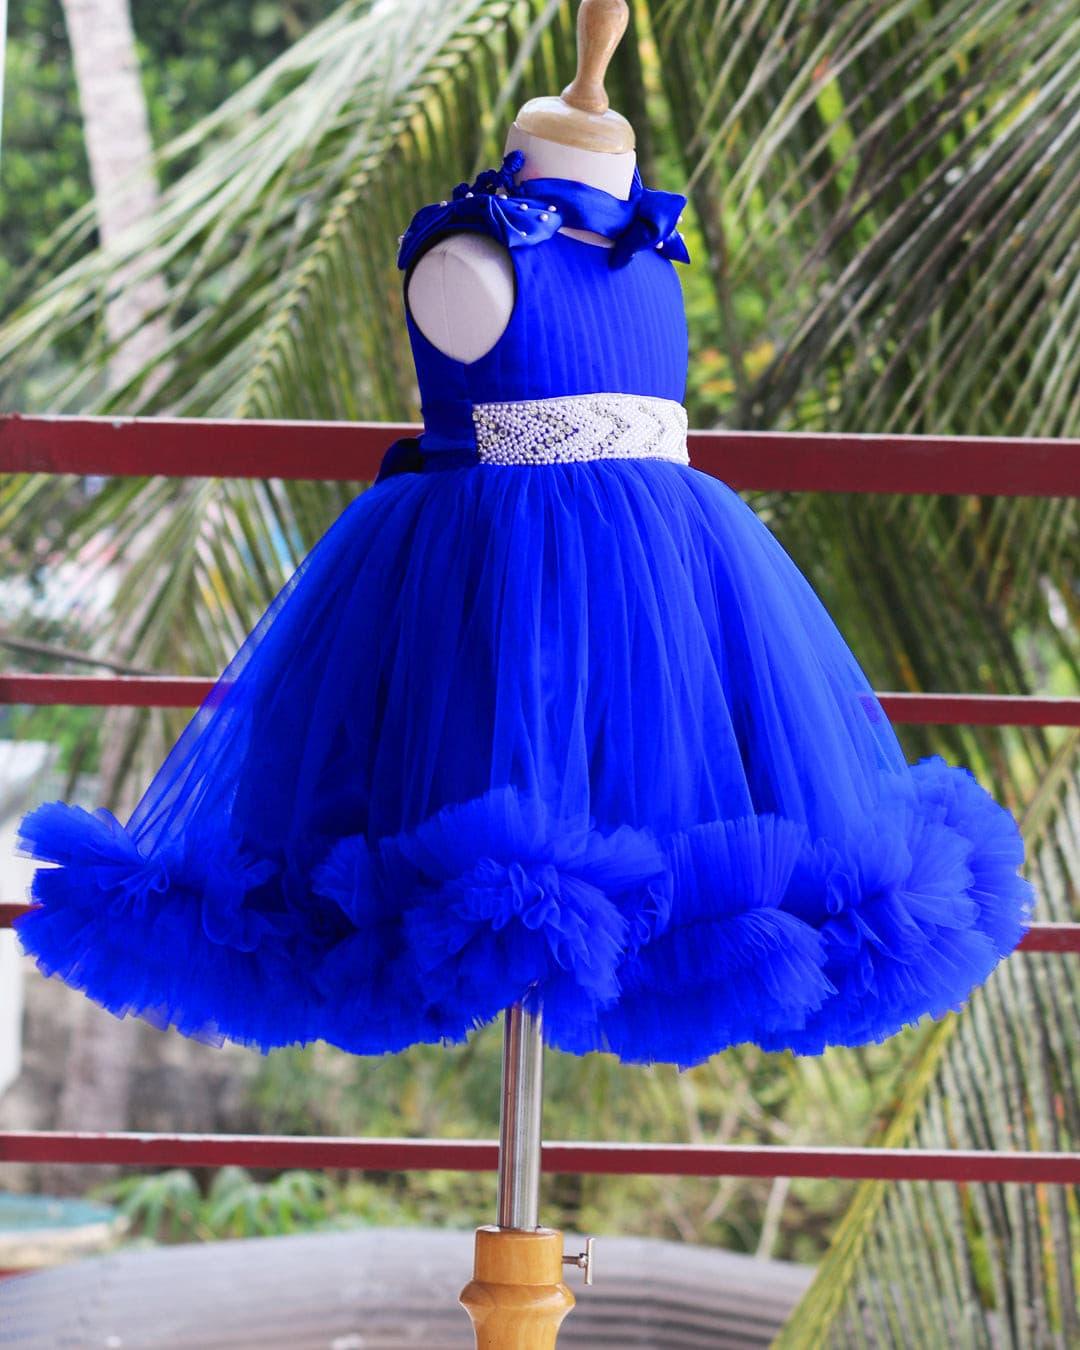 Royalblue Ruffled Pleated Bow Frock
Material: Royal blue nylon mono net with inner portion is covered with premium ultra satin and white cotton lining.
Colour: Royalblue | Sleeve Type: Sleeveless | It